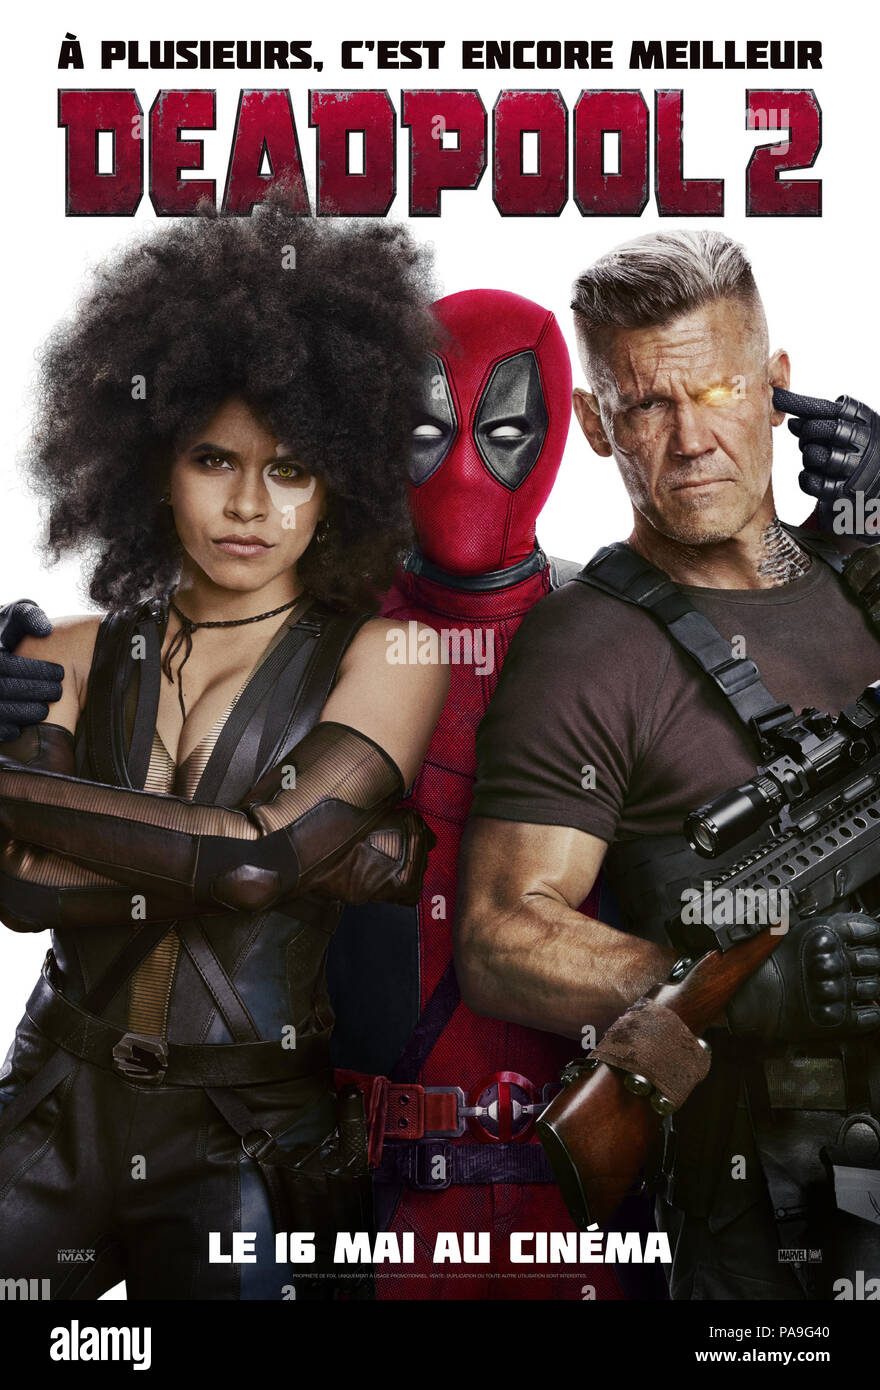 RELEASE DATE: May 18, 2018 TITLE: Deadpool 2 STUDIO: Twentieth Century Fox  DIRECTOR: David Leitch PLOT: After surviving a near fatal bovine attack, a  disfigured cafeteria chef (Wade Wilson) struggles to fulfill